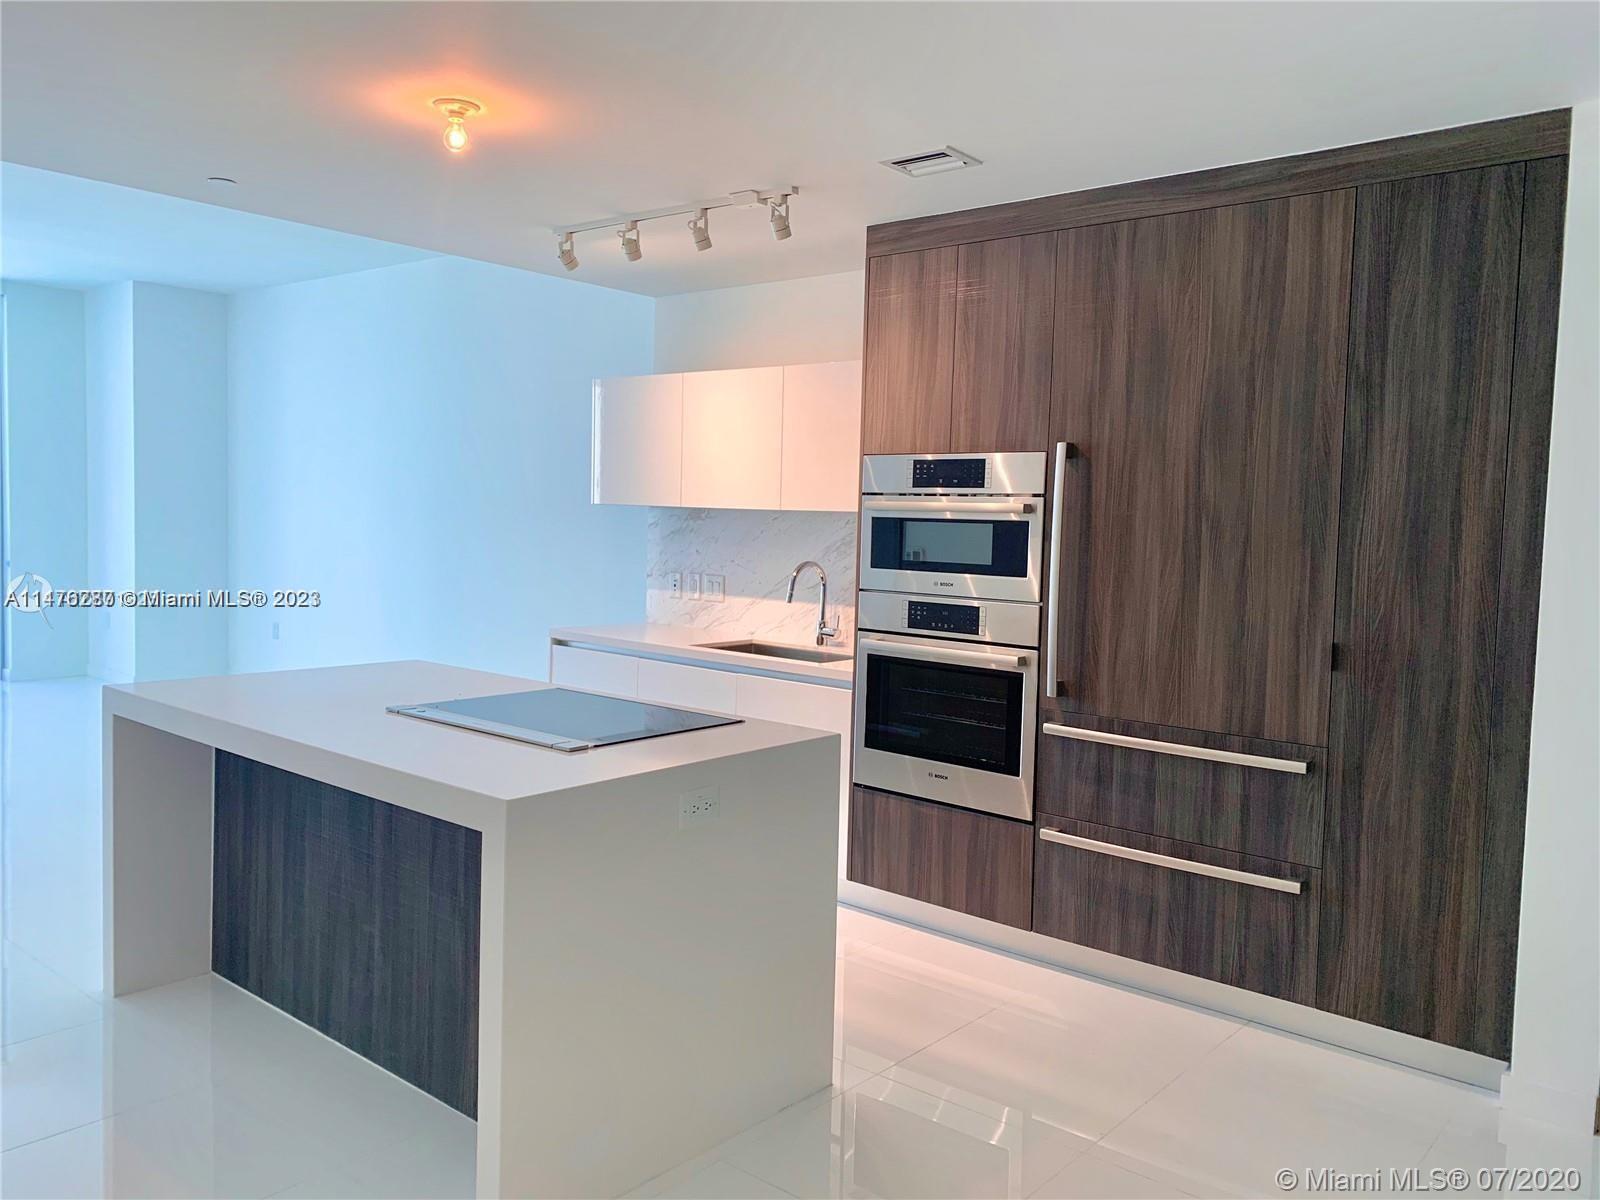 a kitchen with kitchen island a counter top space wooden floor and appliances